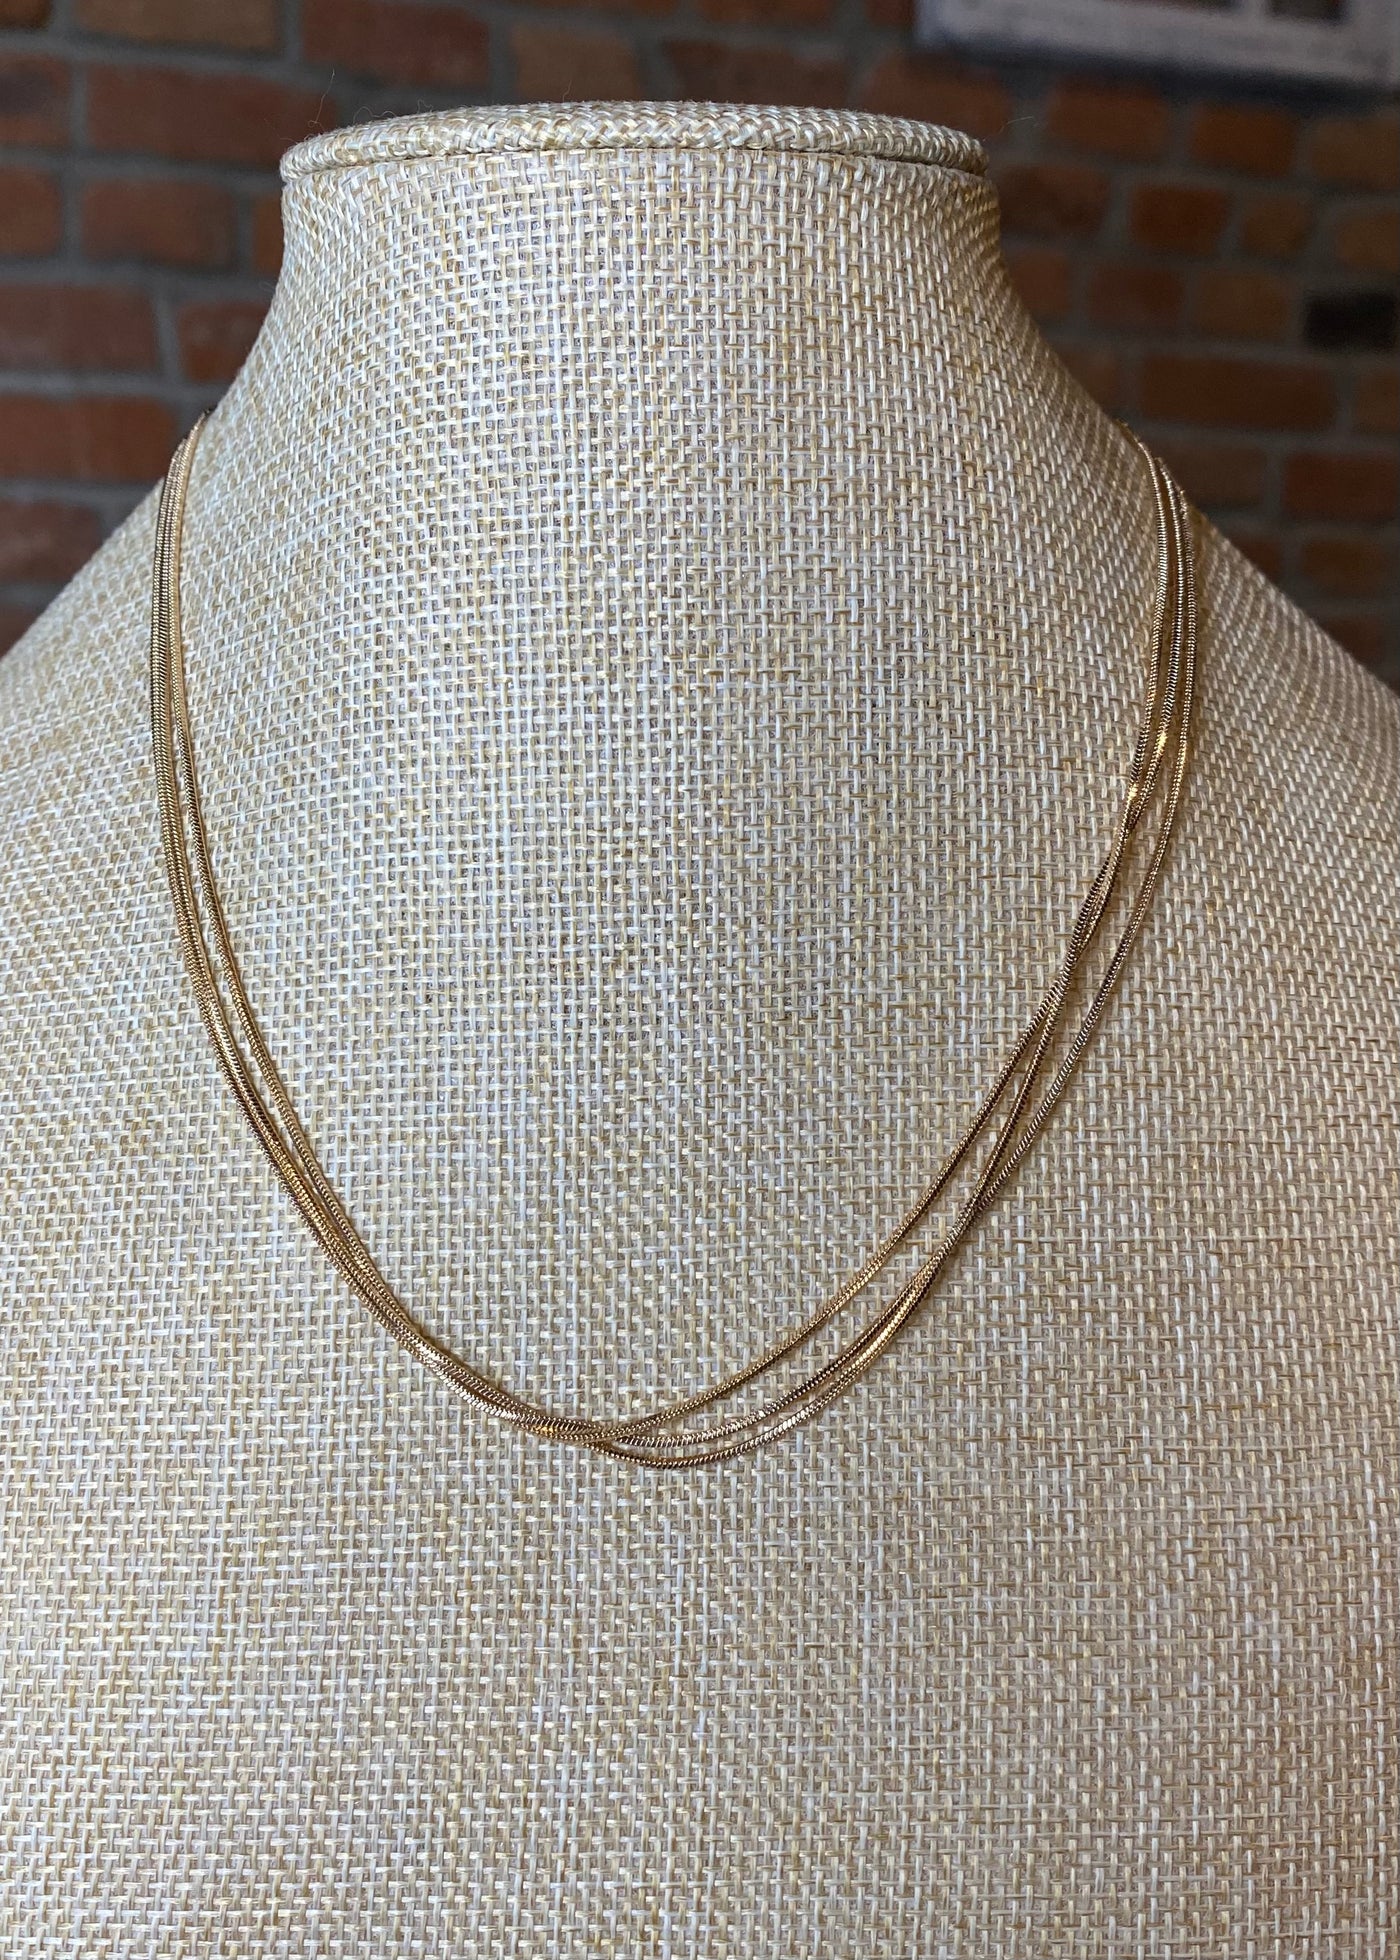 Triple Layered Snake Chain Necklace Gold